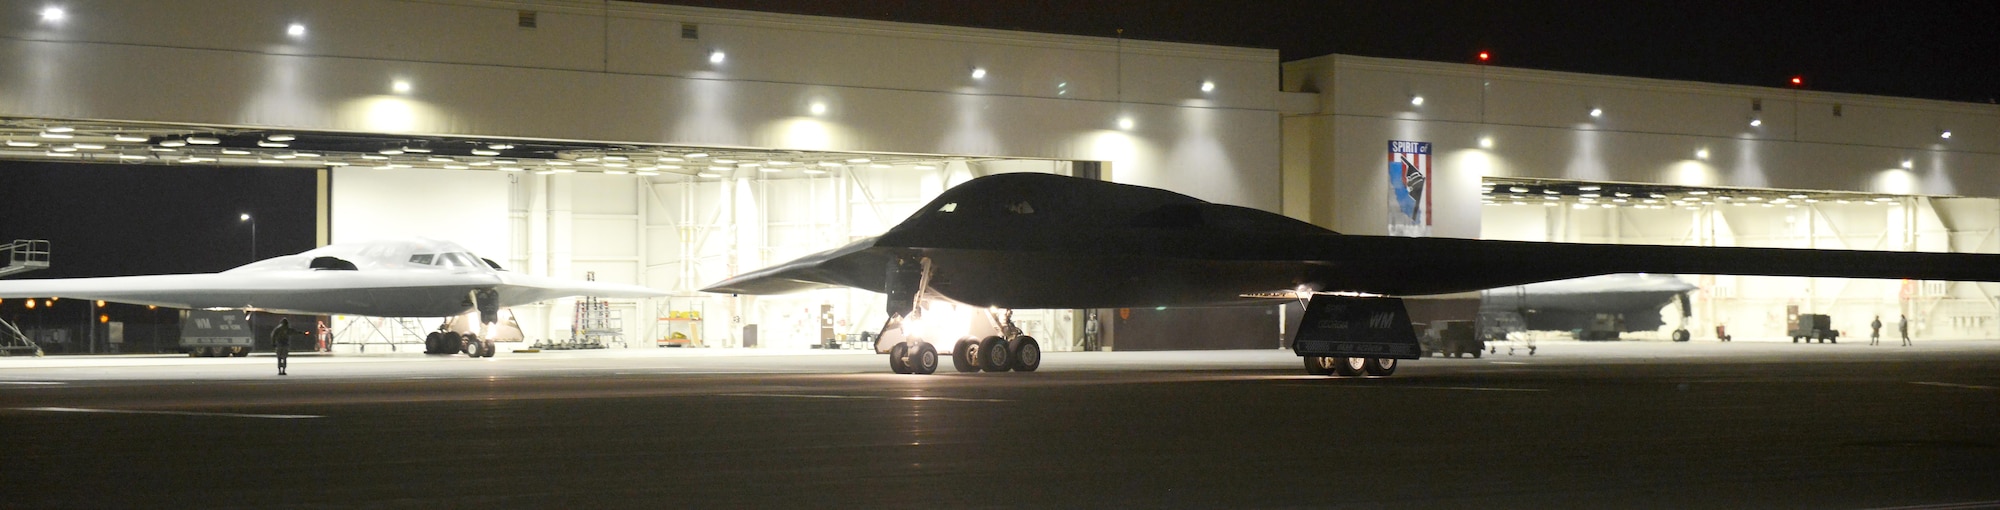 Two B-2 Spirit stealth bombers from the 509th Bomb Wing at Whiteman Air Force Base support operations near Sirte, Libya. In conjunction with the Libyan Government of National Accord, the U.S. military conducted precision airstrikes Jan. 19, 2017 destroying two Daesh camps 45 kilometers southwest of Sirte. (U.S. Air Force photo by Senior Airman Joel Pfiester)